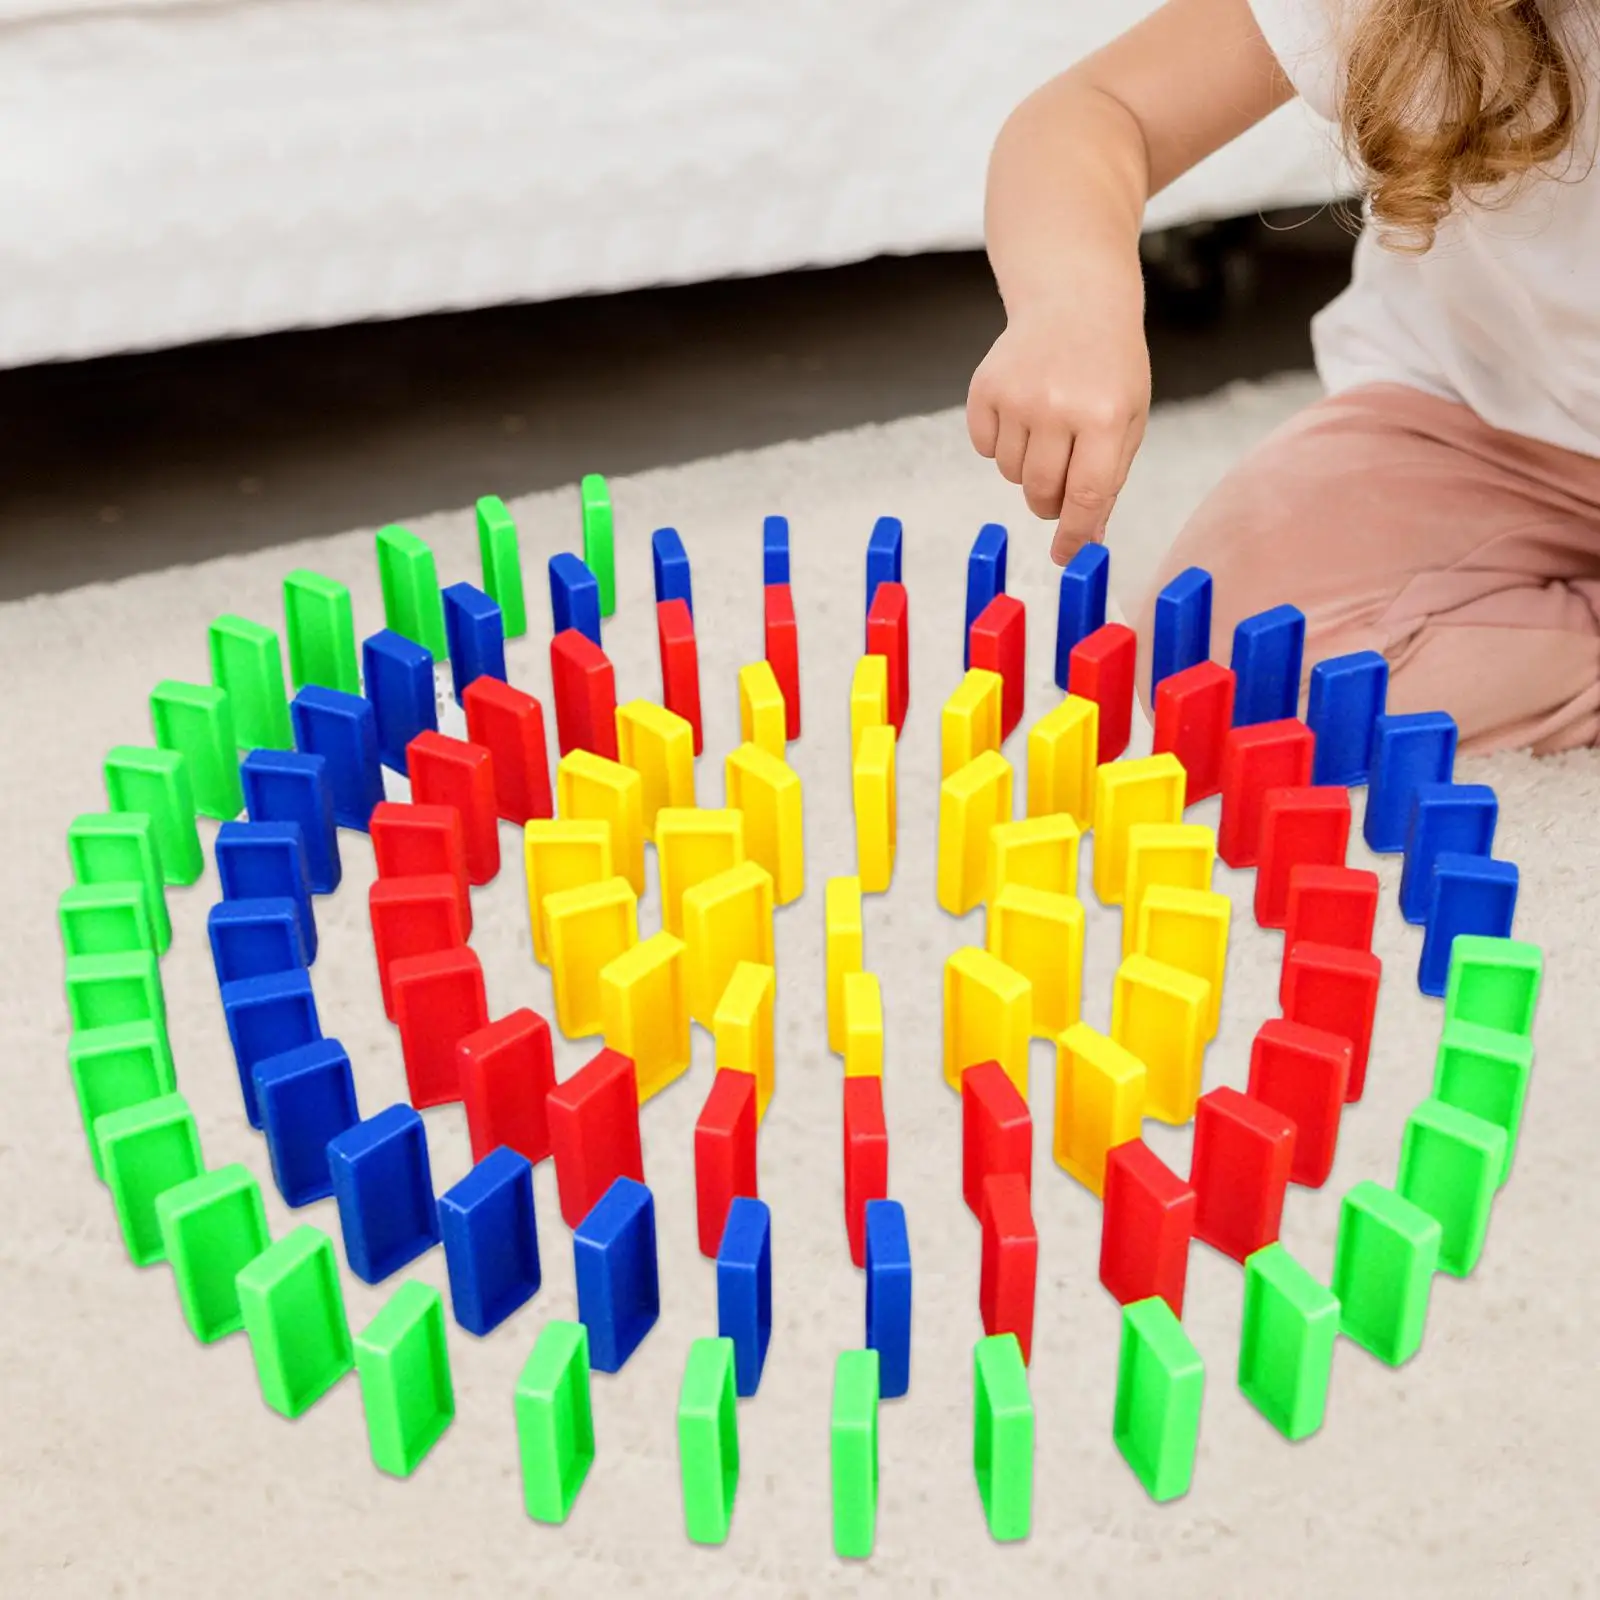 100x Colorful Dominoes Blocks Building Stacking Game Family Games for Kids Girls Boys Toddler Creative Gifts